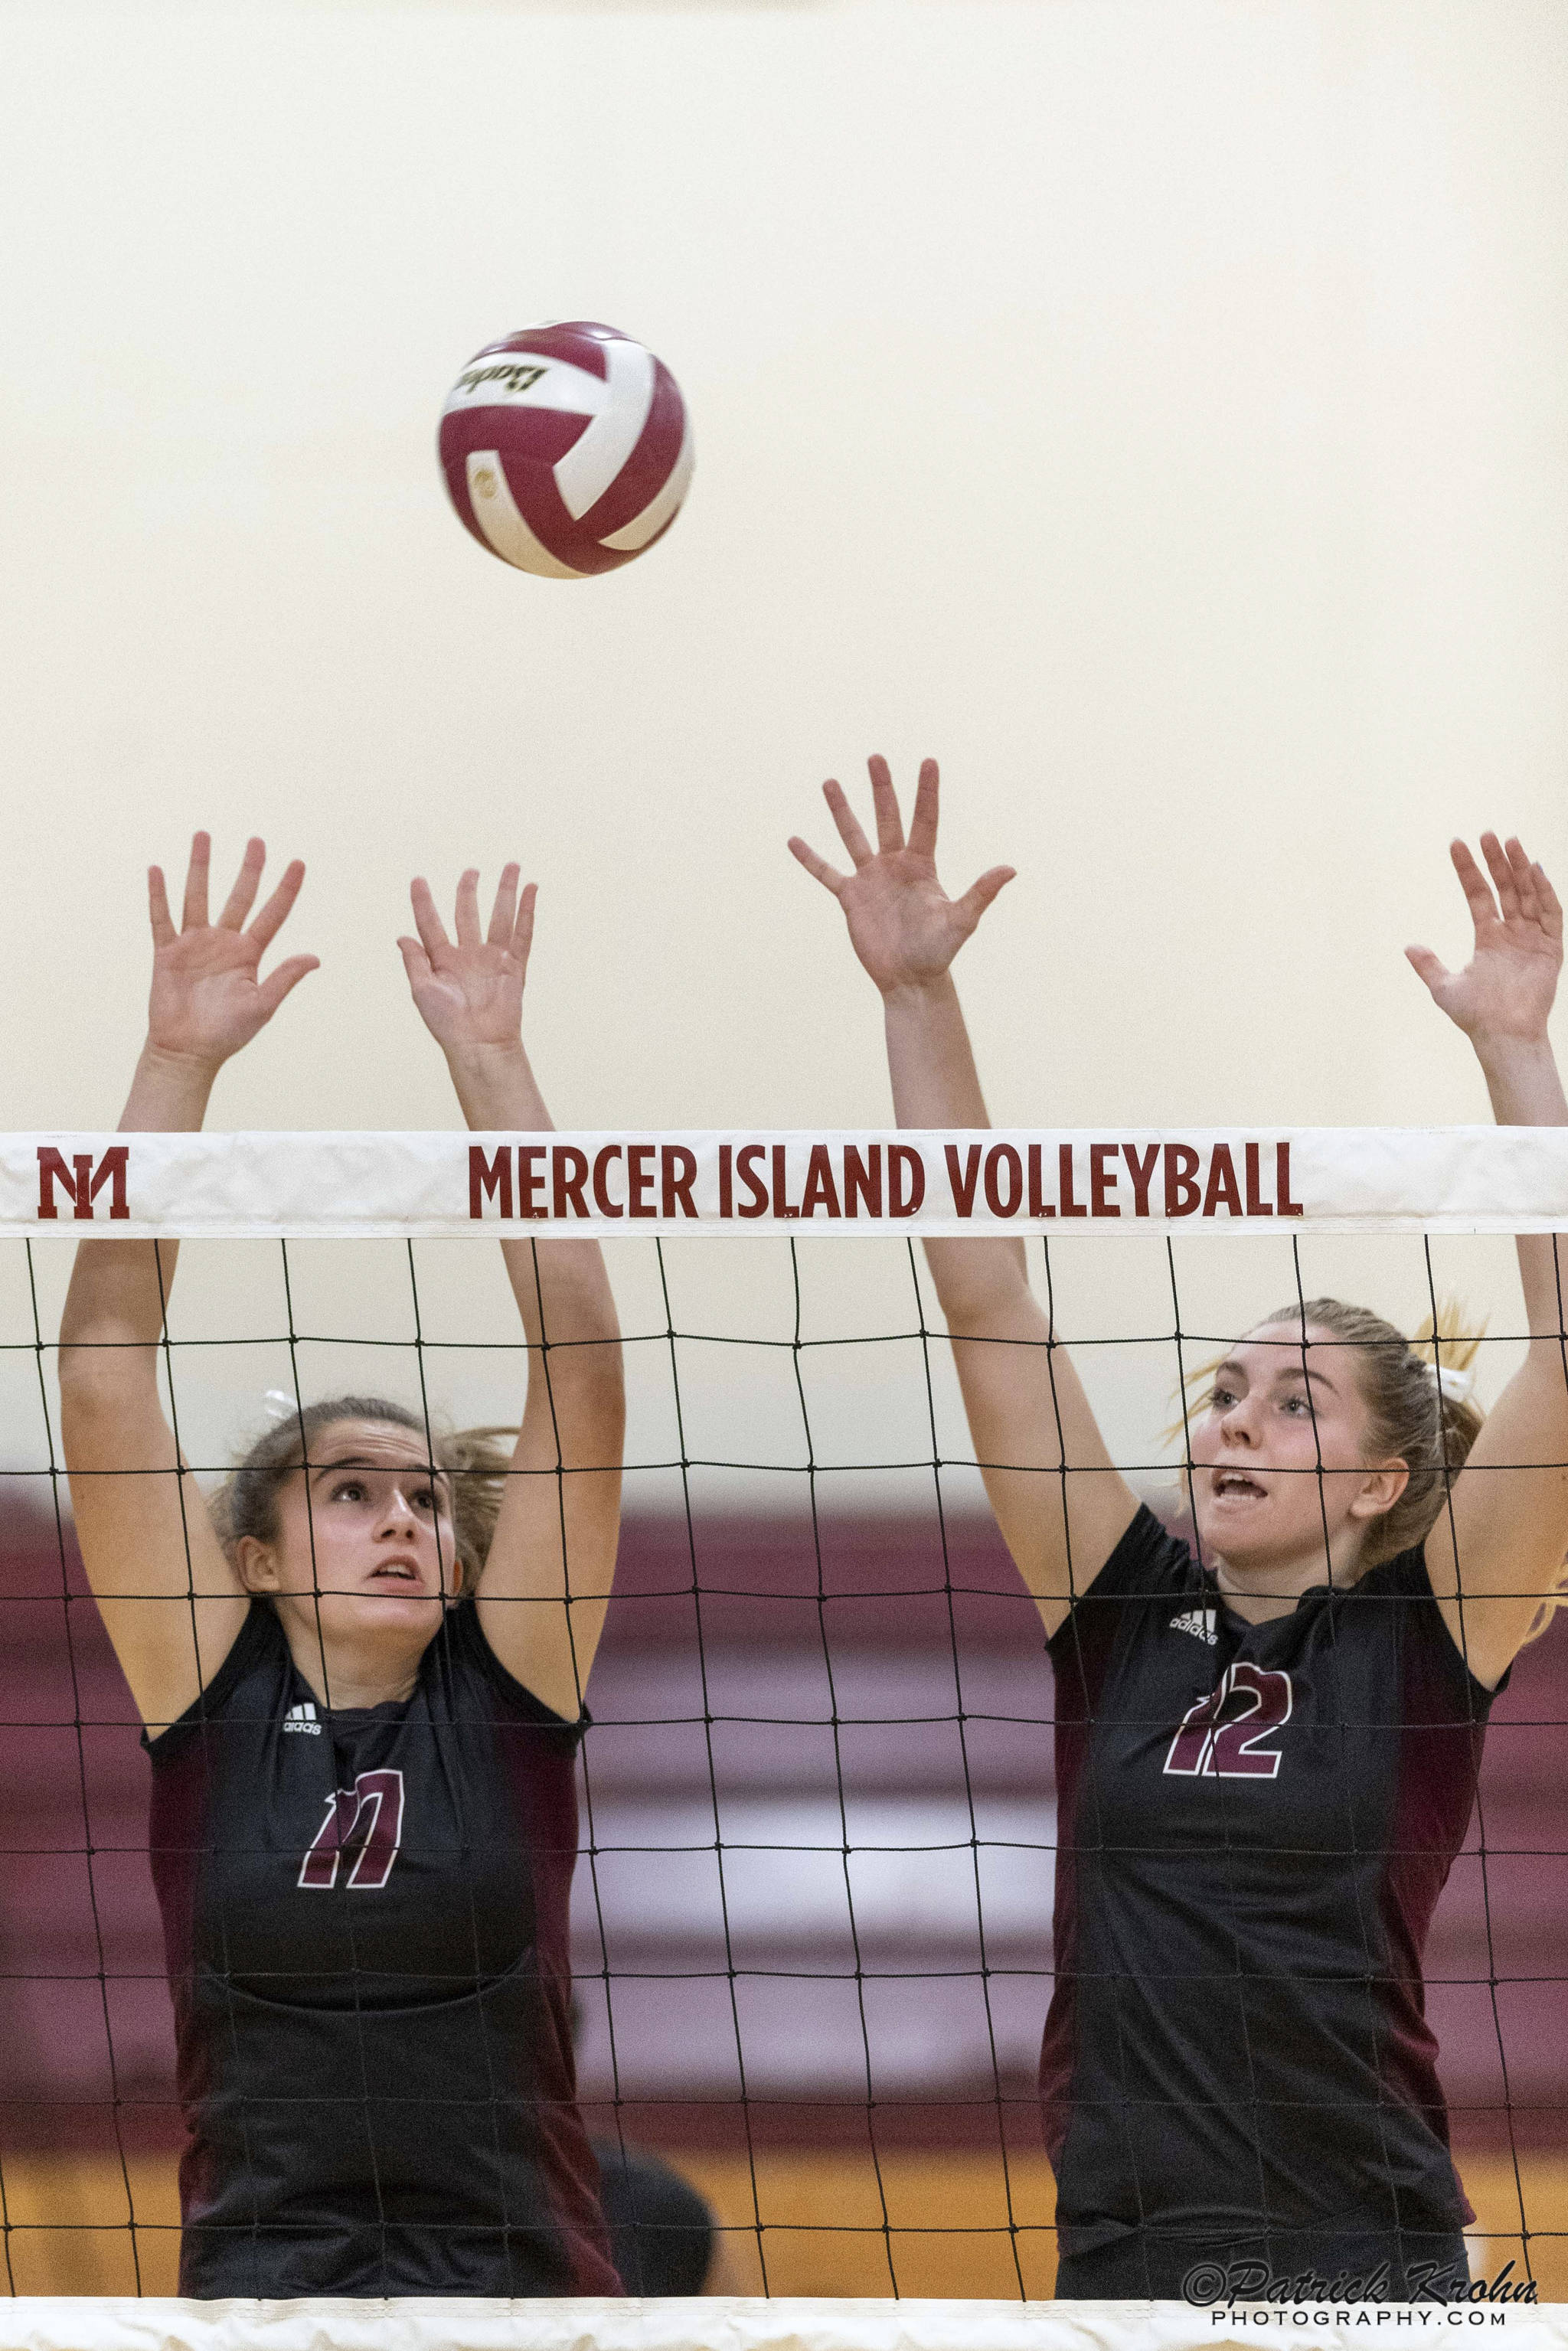 Mercer Island volleyball players Anika Iverson, left, and Quinn Casey, right, leap into the air against the Skyline Spartans in a non-league contest on Sept. 12 on Mercer Island. Skyline defeated Mercer Island 3-1 in the matchup. Photo courtesy of Patrick Krohn/Patrick Krohn Photography